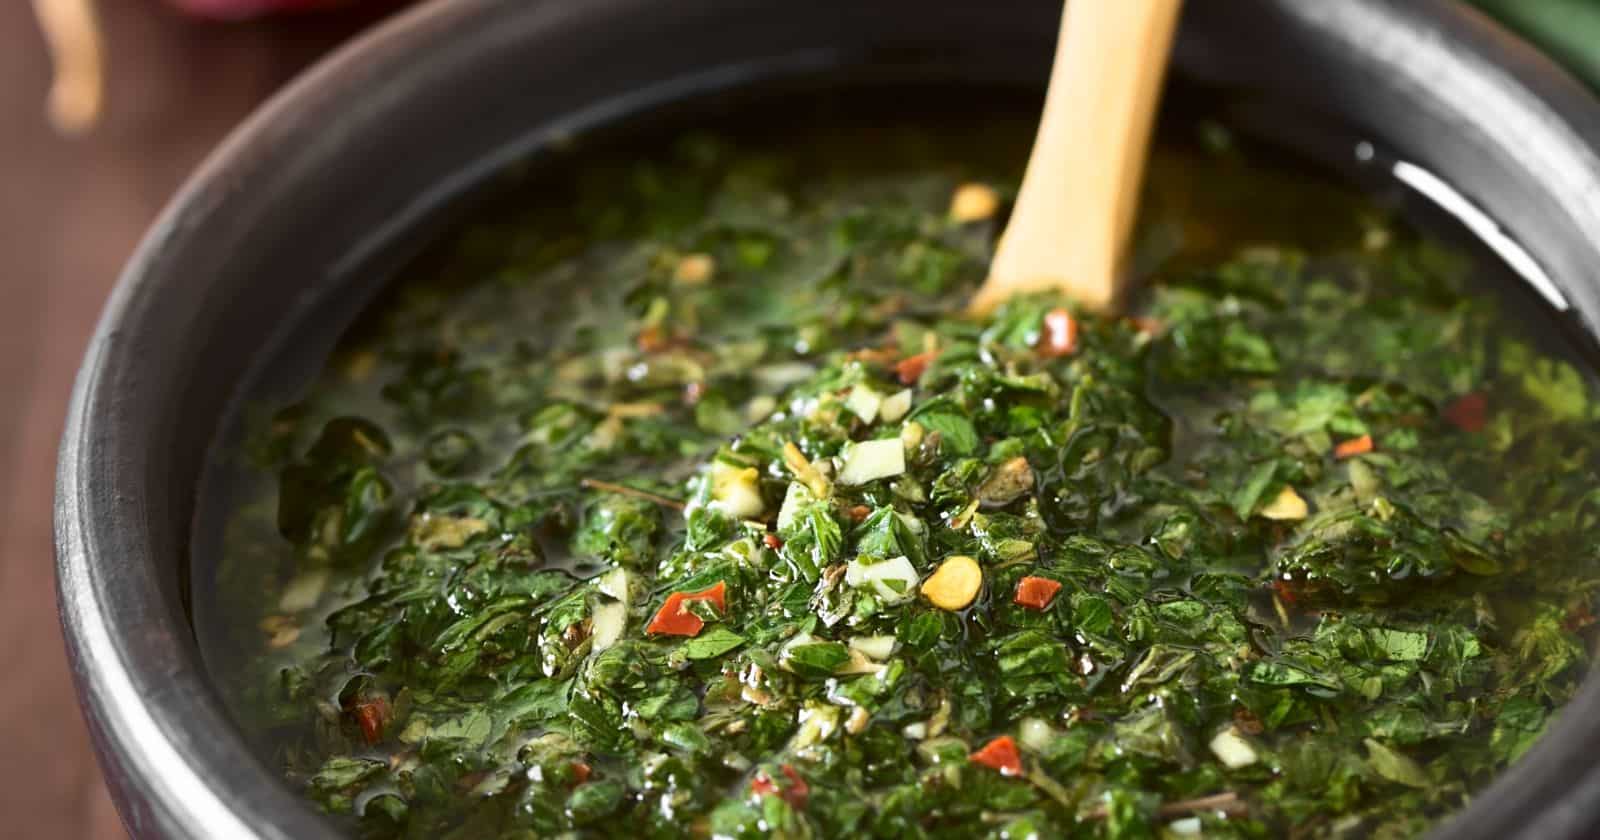 What Does Chimichurri Sauce Taste Like? It is Supposed To Be Spicy?